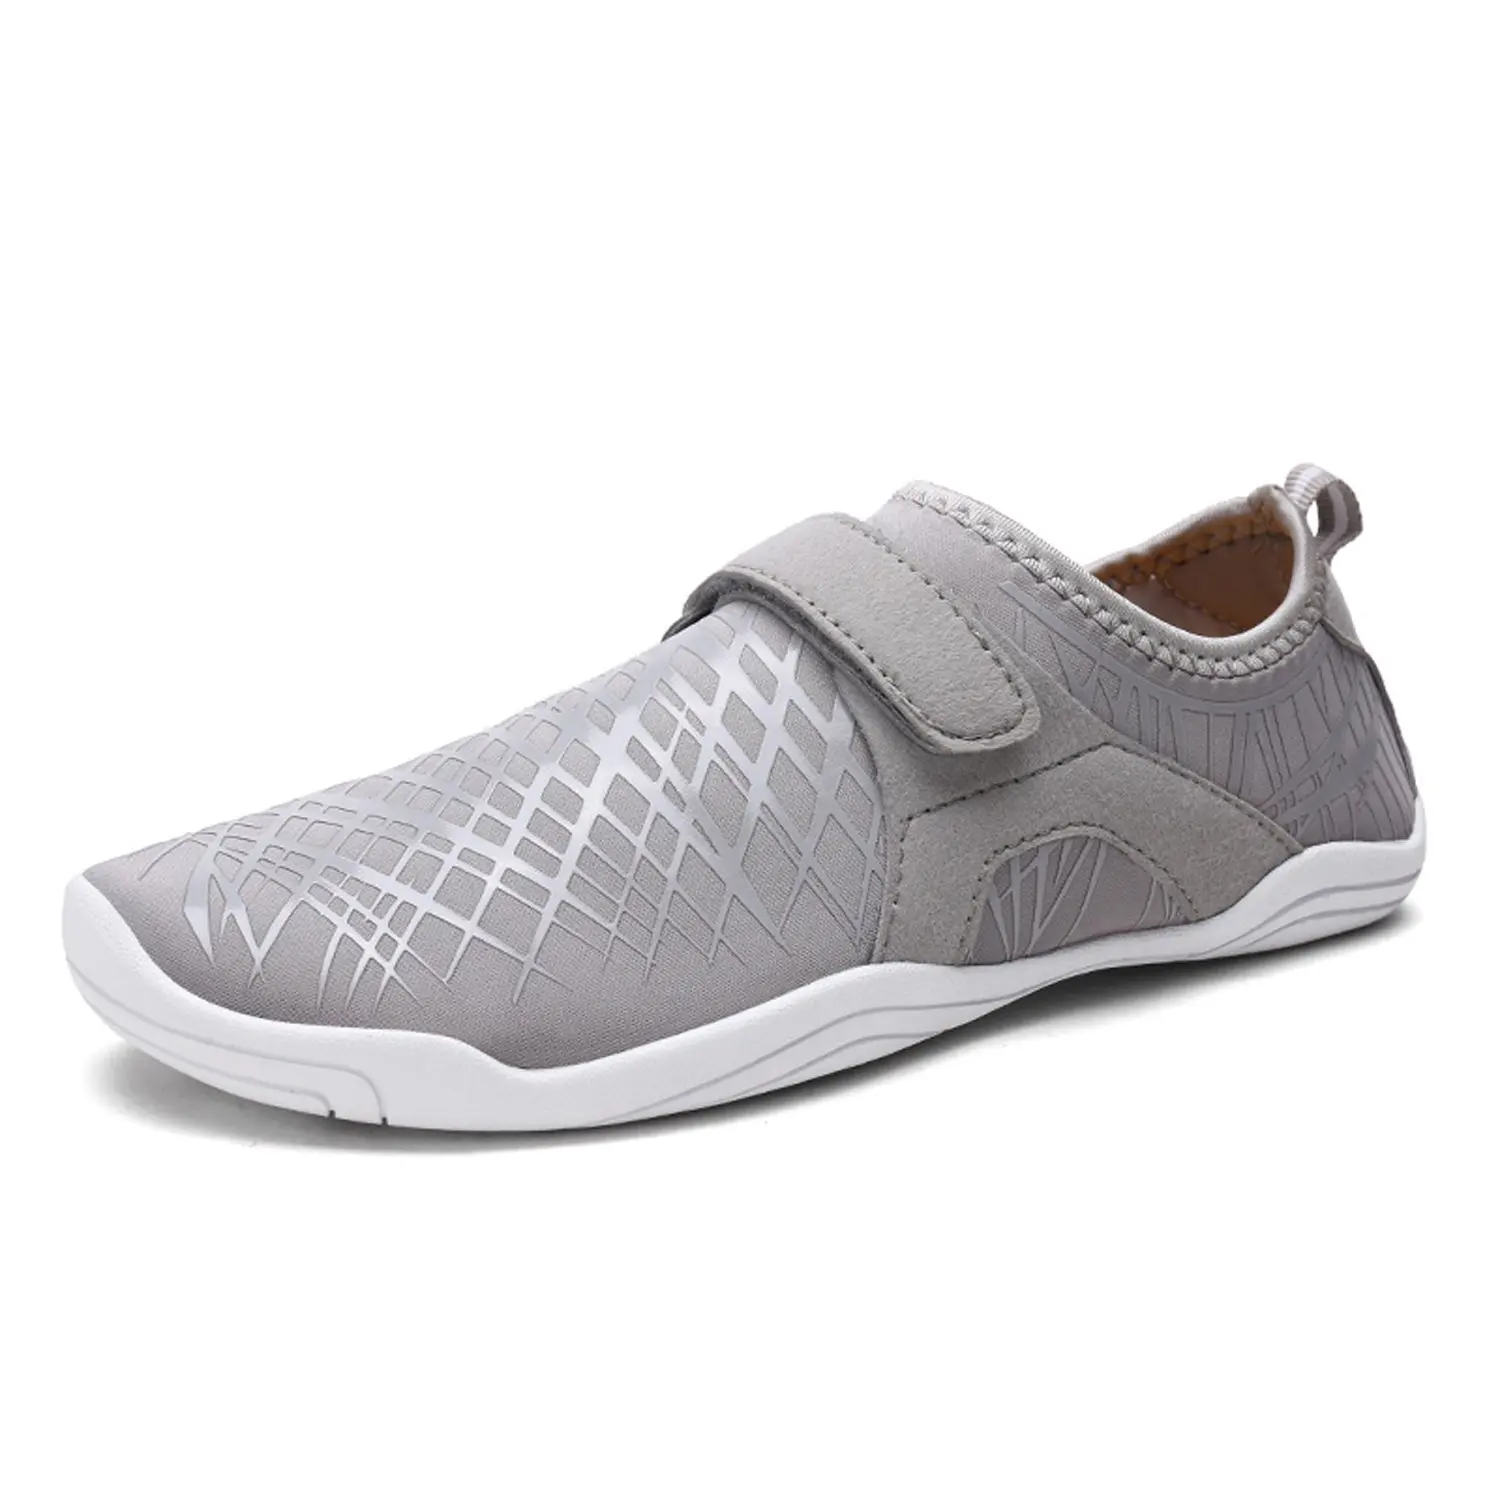 Cheap Womens Shoes Velcro, find Womens Shoes Velcro deals on line at ...